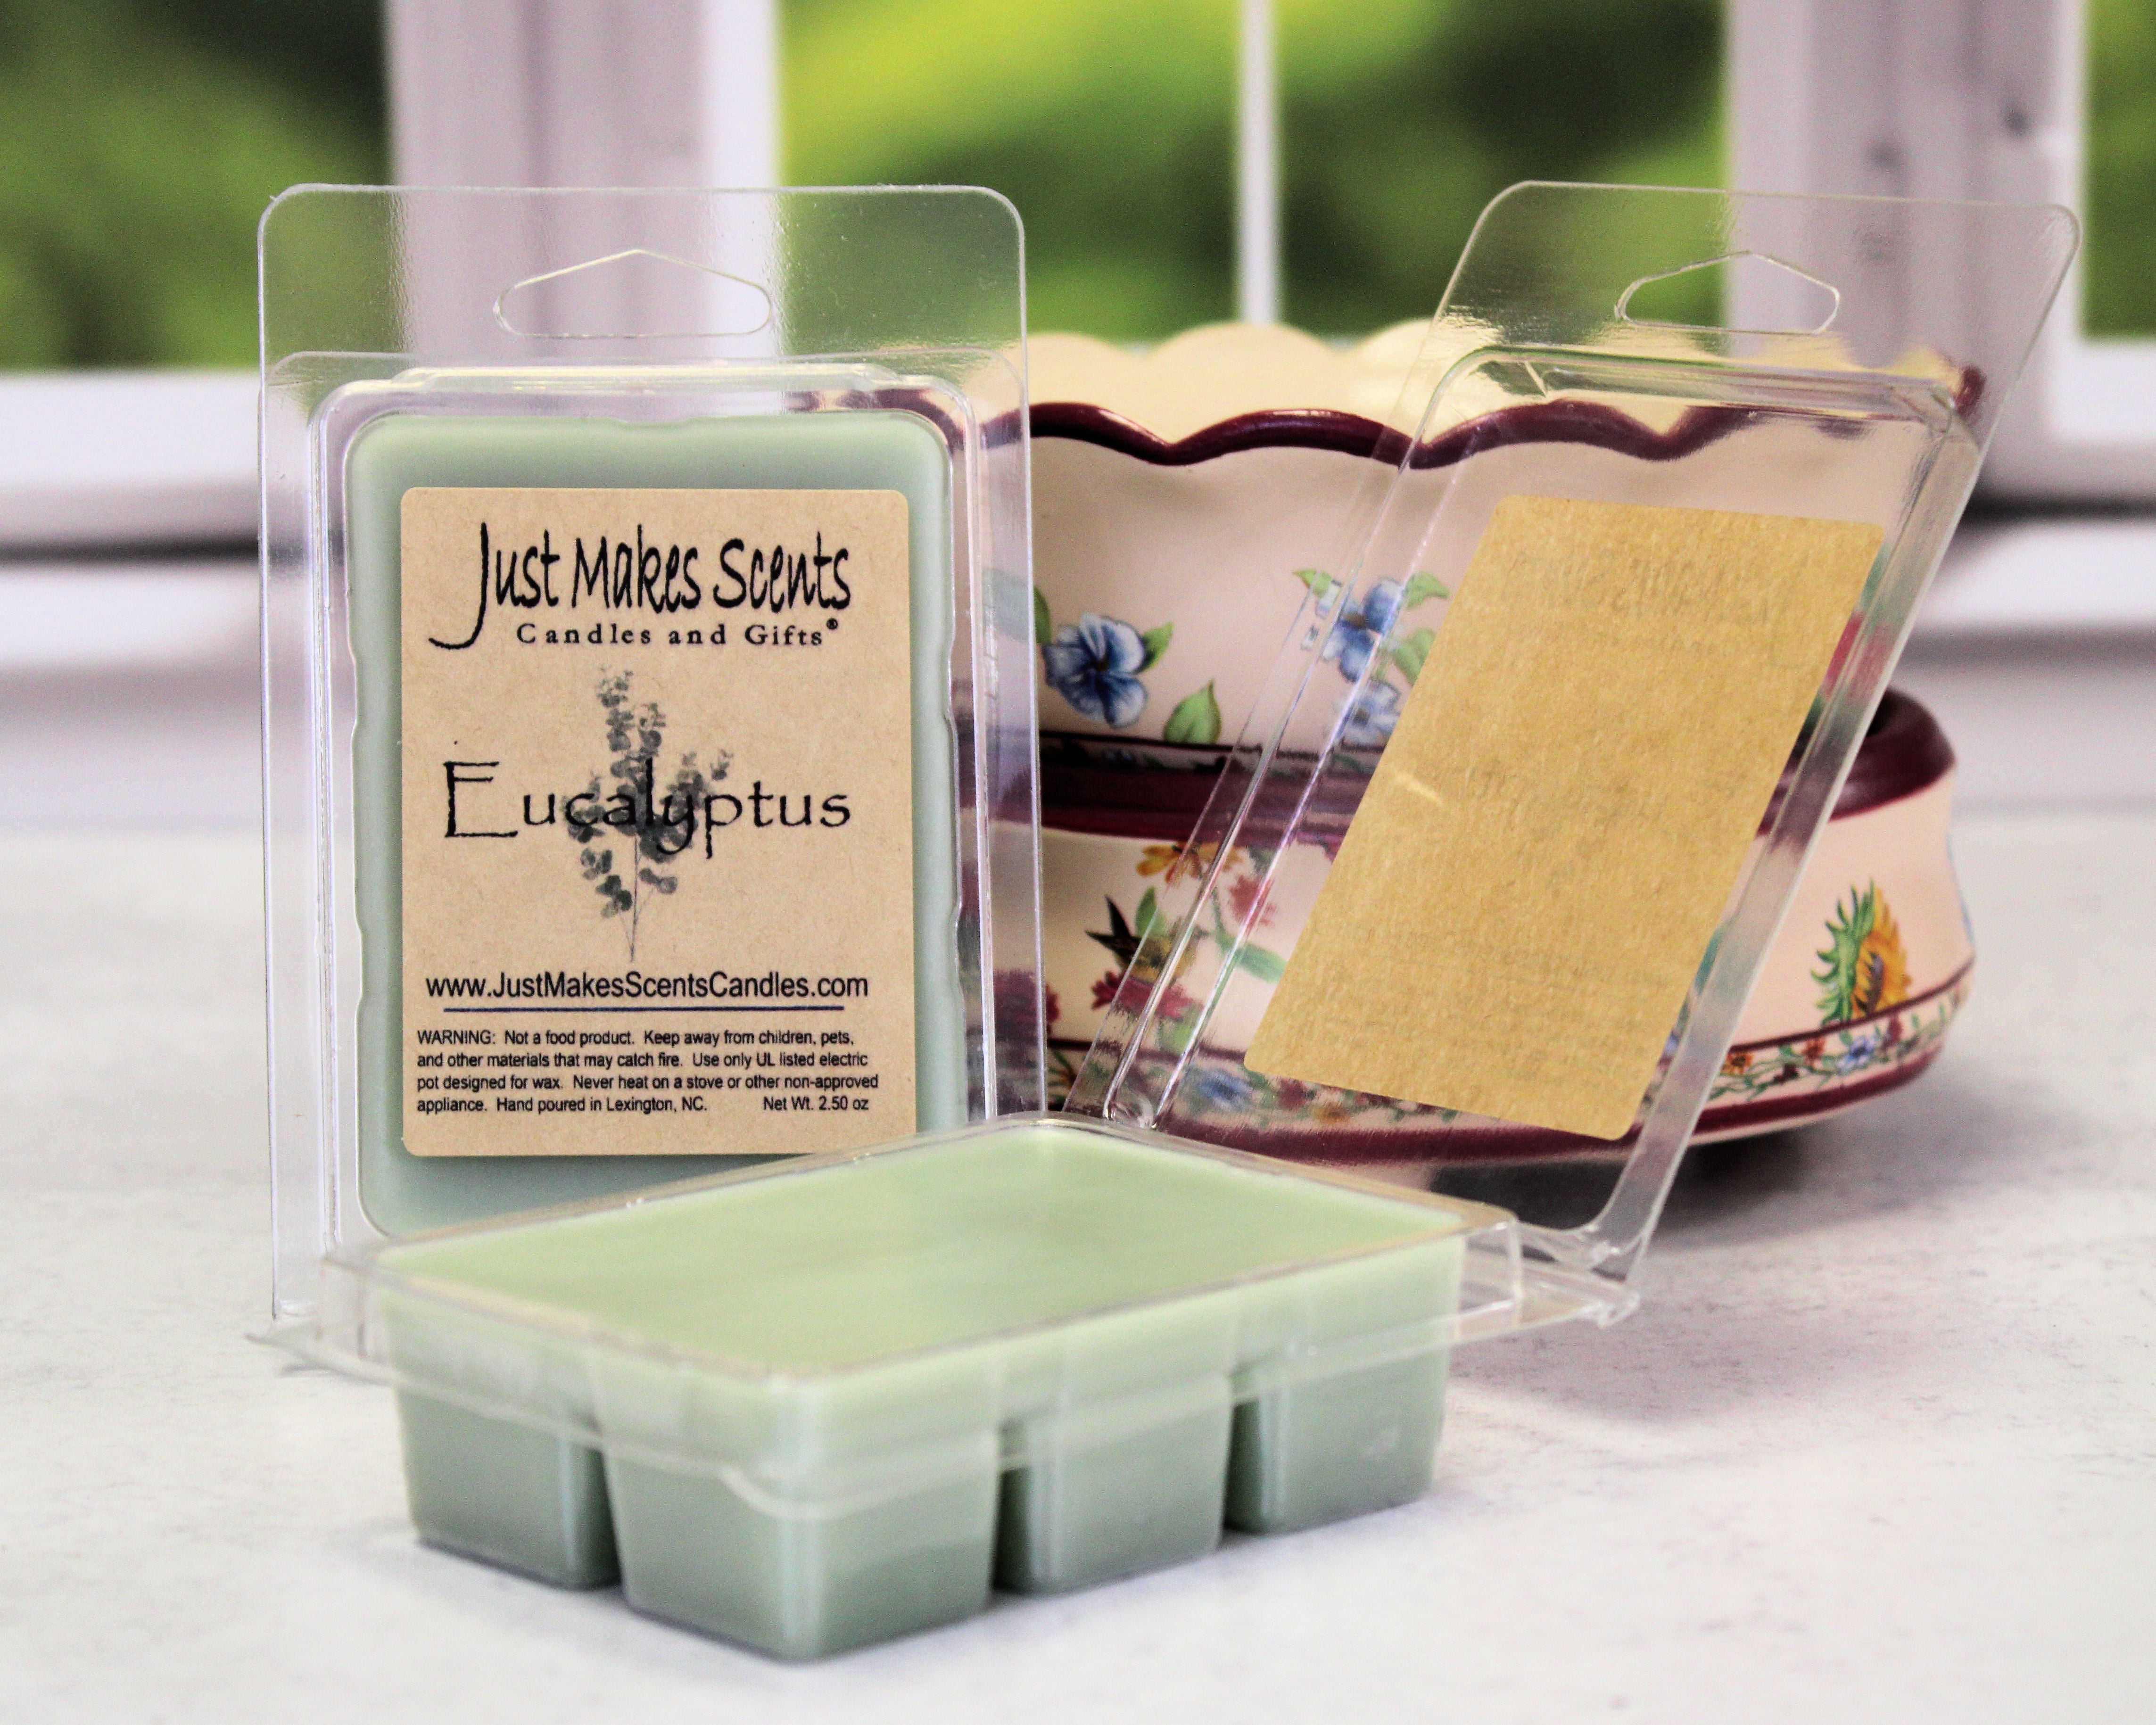 STRONG Floral Scented Wax Melts Soy Wax Melts Long-lasting Wax